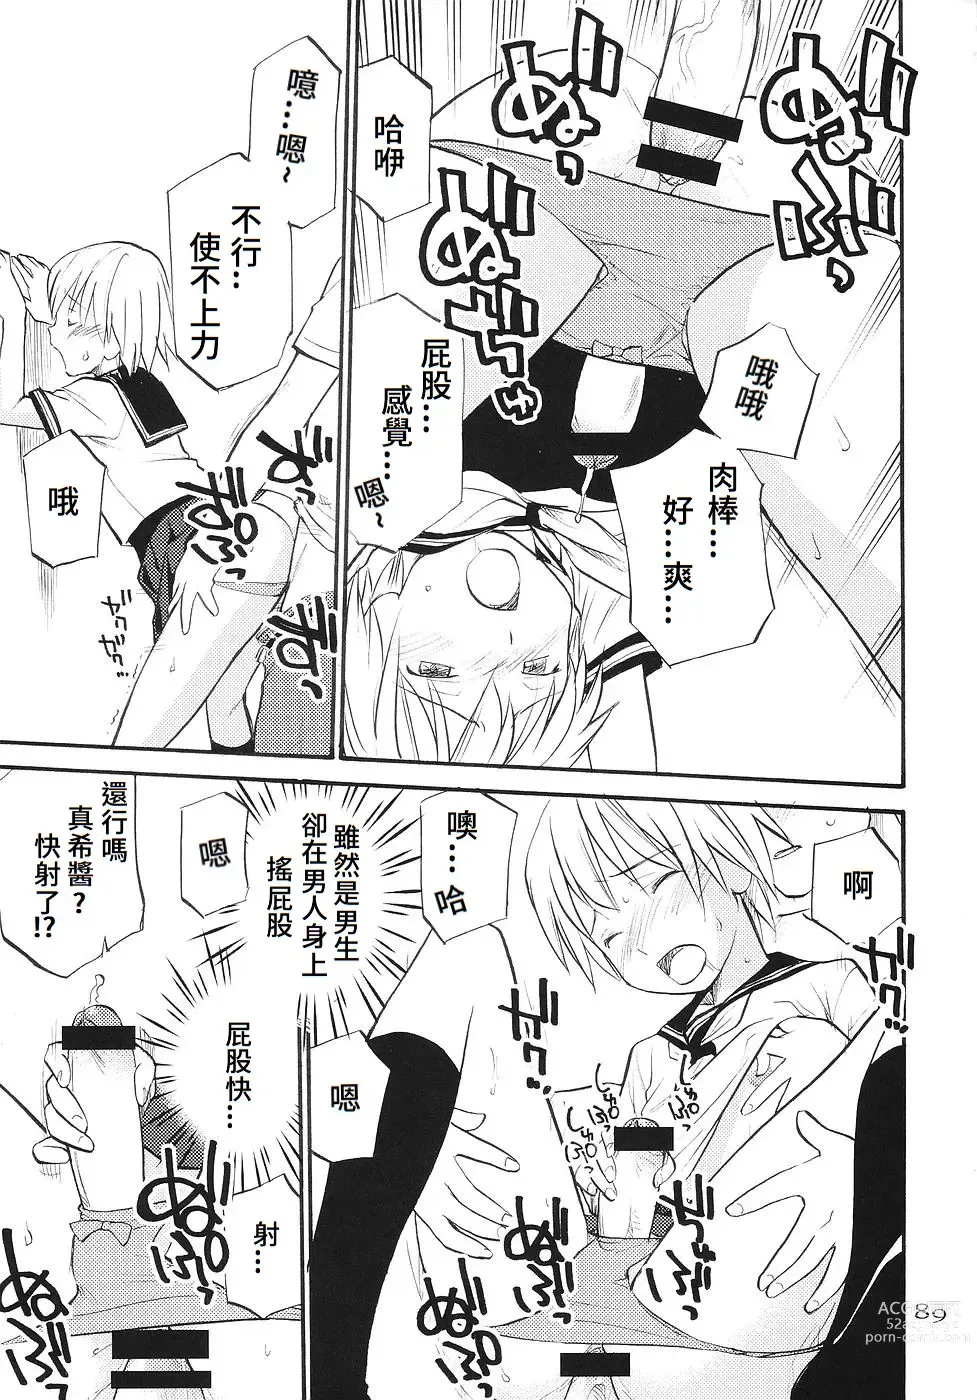 Page 3 of doujinshi Boy with the Sailor Suit